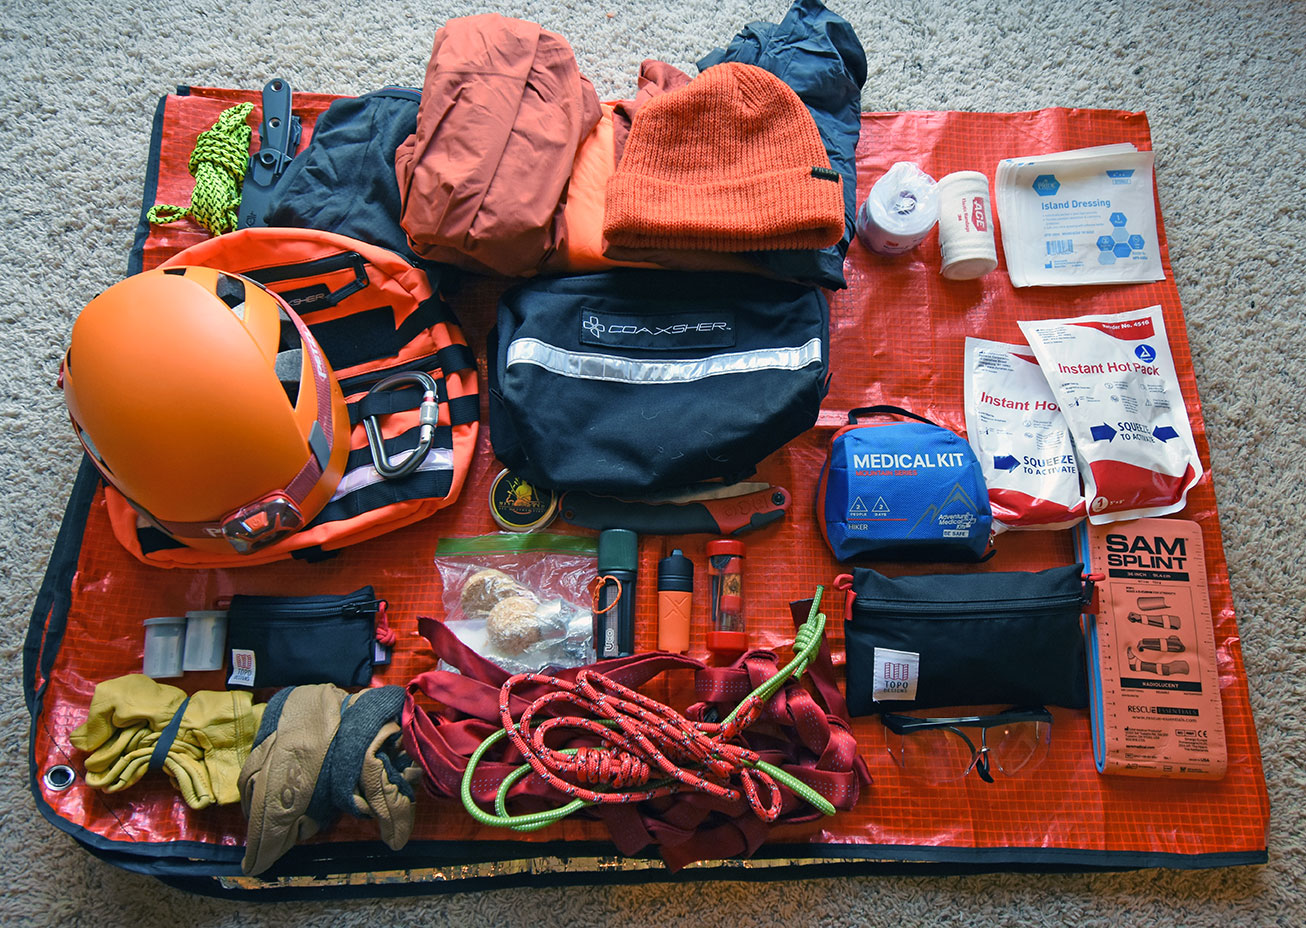 Coaxsher pack modules, ropes, webbing, medical supplies, fire starters, matches, gloves, spare batteries, saw, knife, and helmet